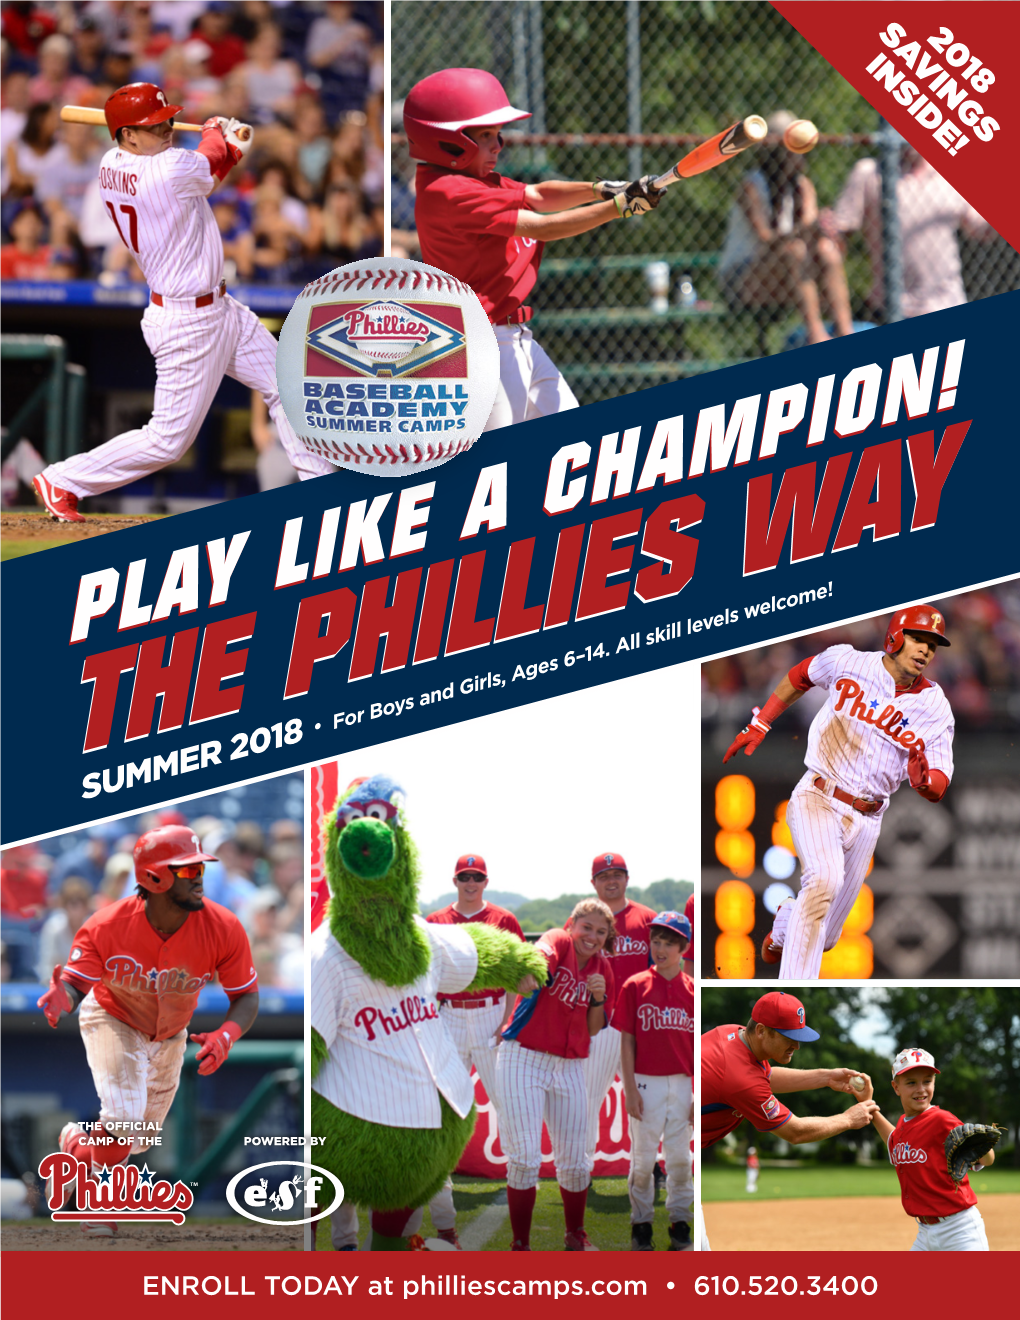 PLAY LIKE a CHAMPION! the PHILLIES • for Boys and Girls, Ages 6–14